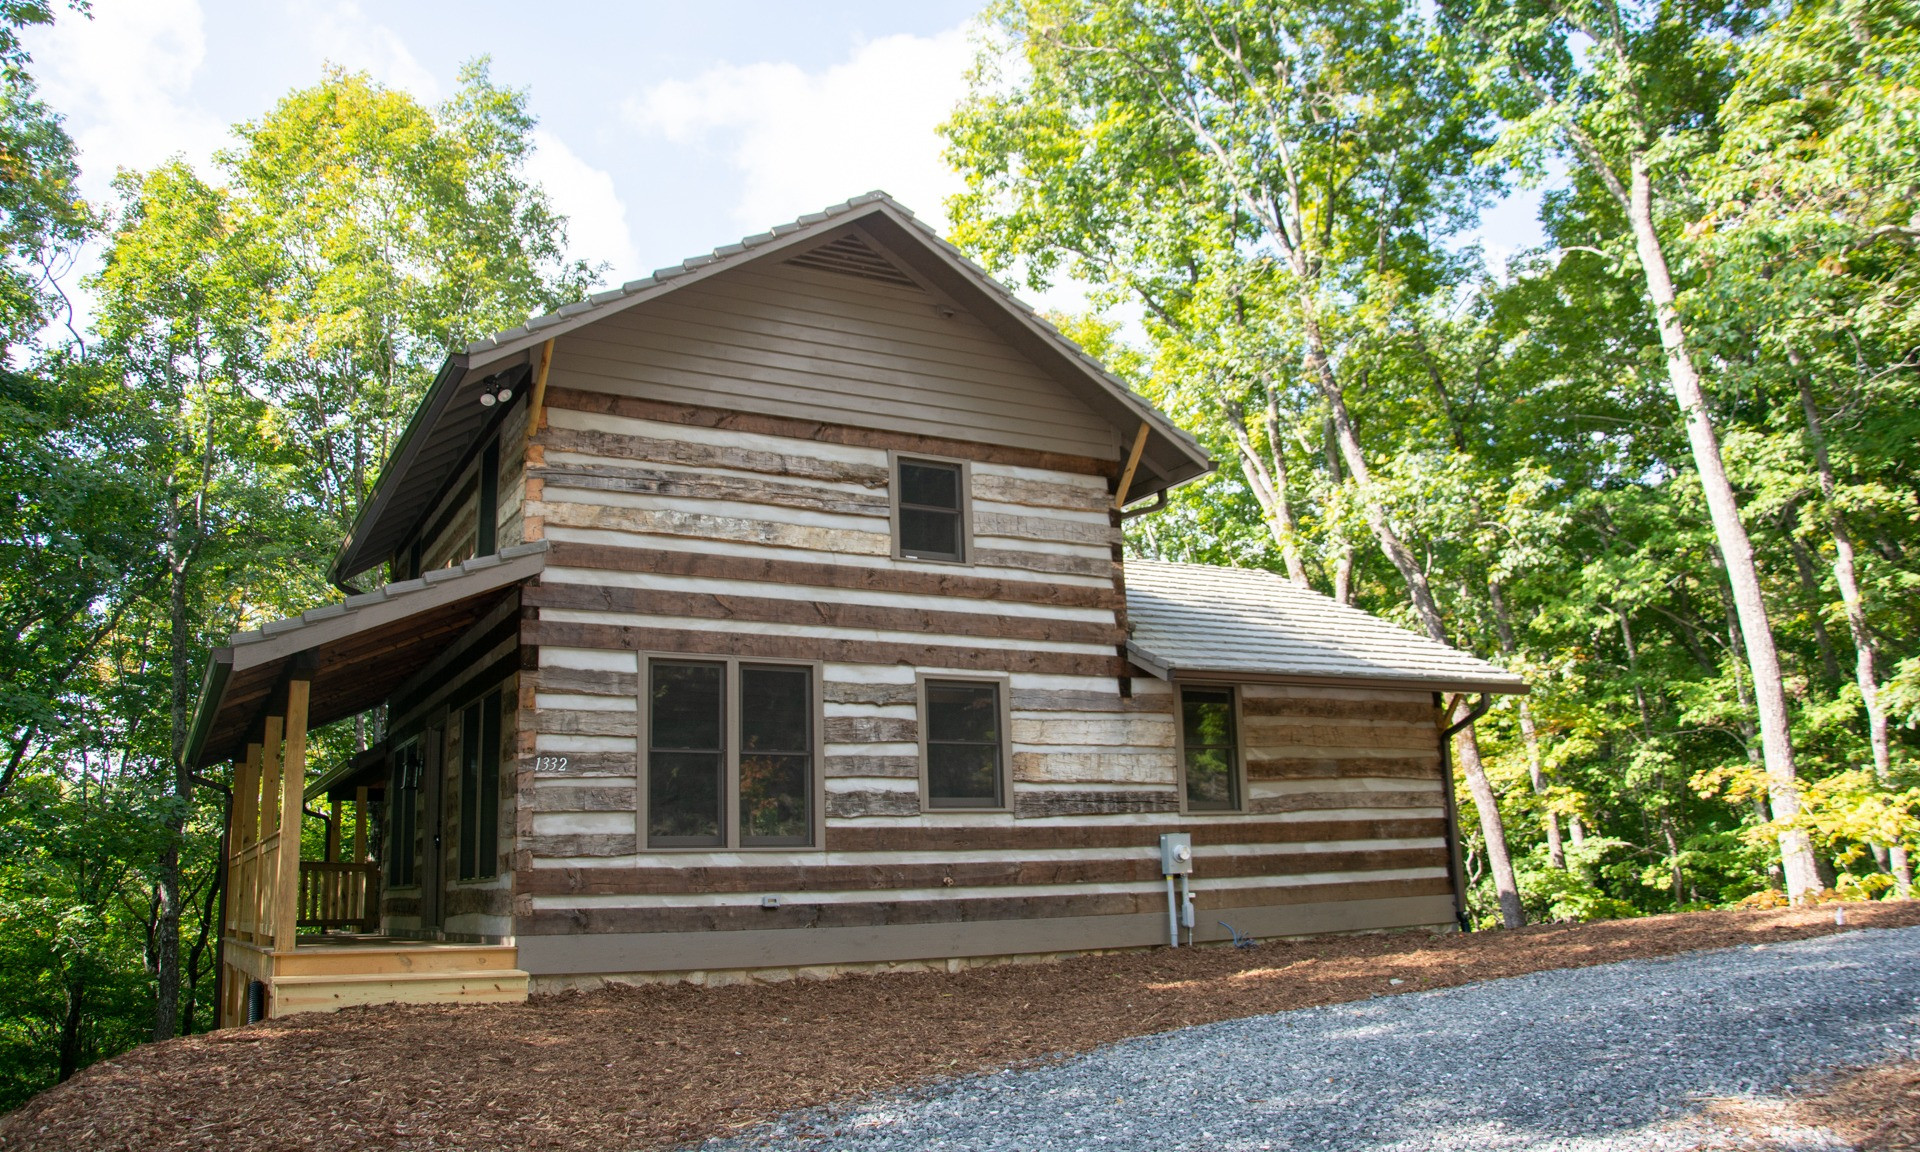 Log Cabin in the Woods! The setting is perfect for those looking to spend leisurely afternoon relaxing on the back deck enjoying the sounds of Nature and the surrounding woodland forest.